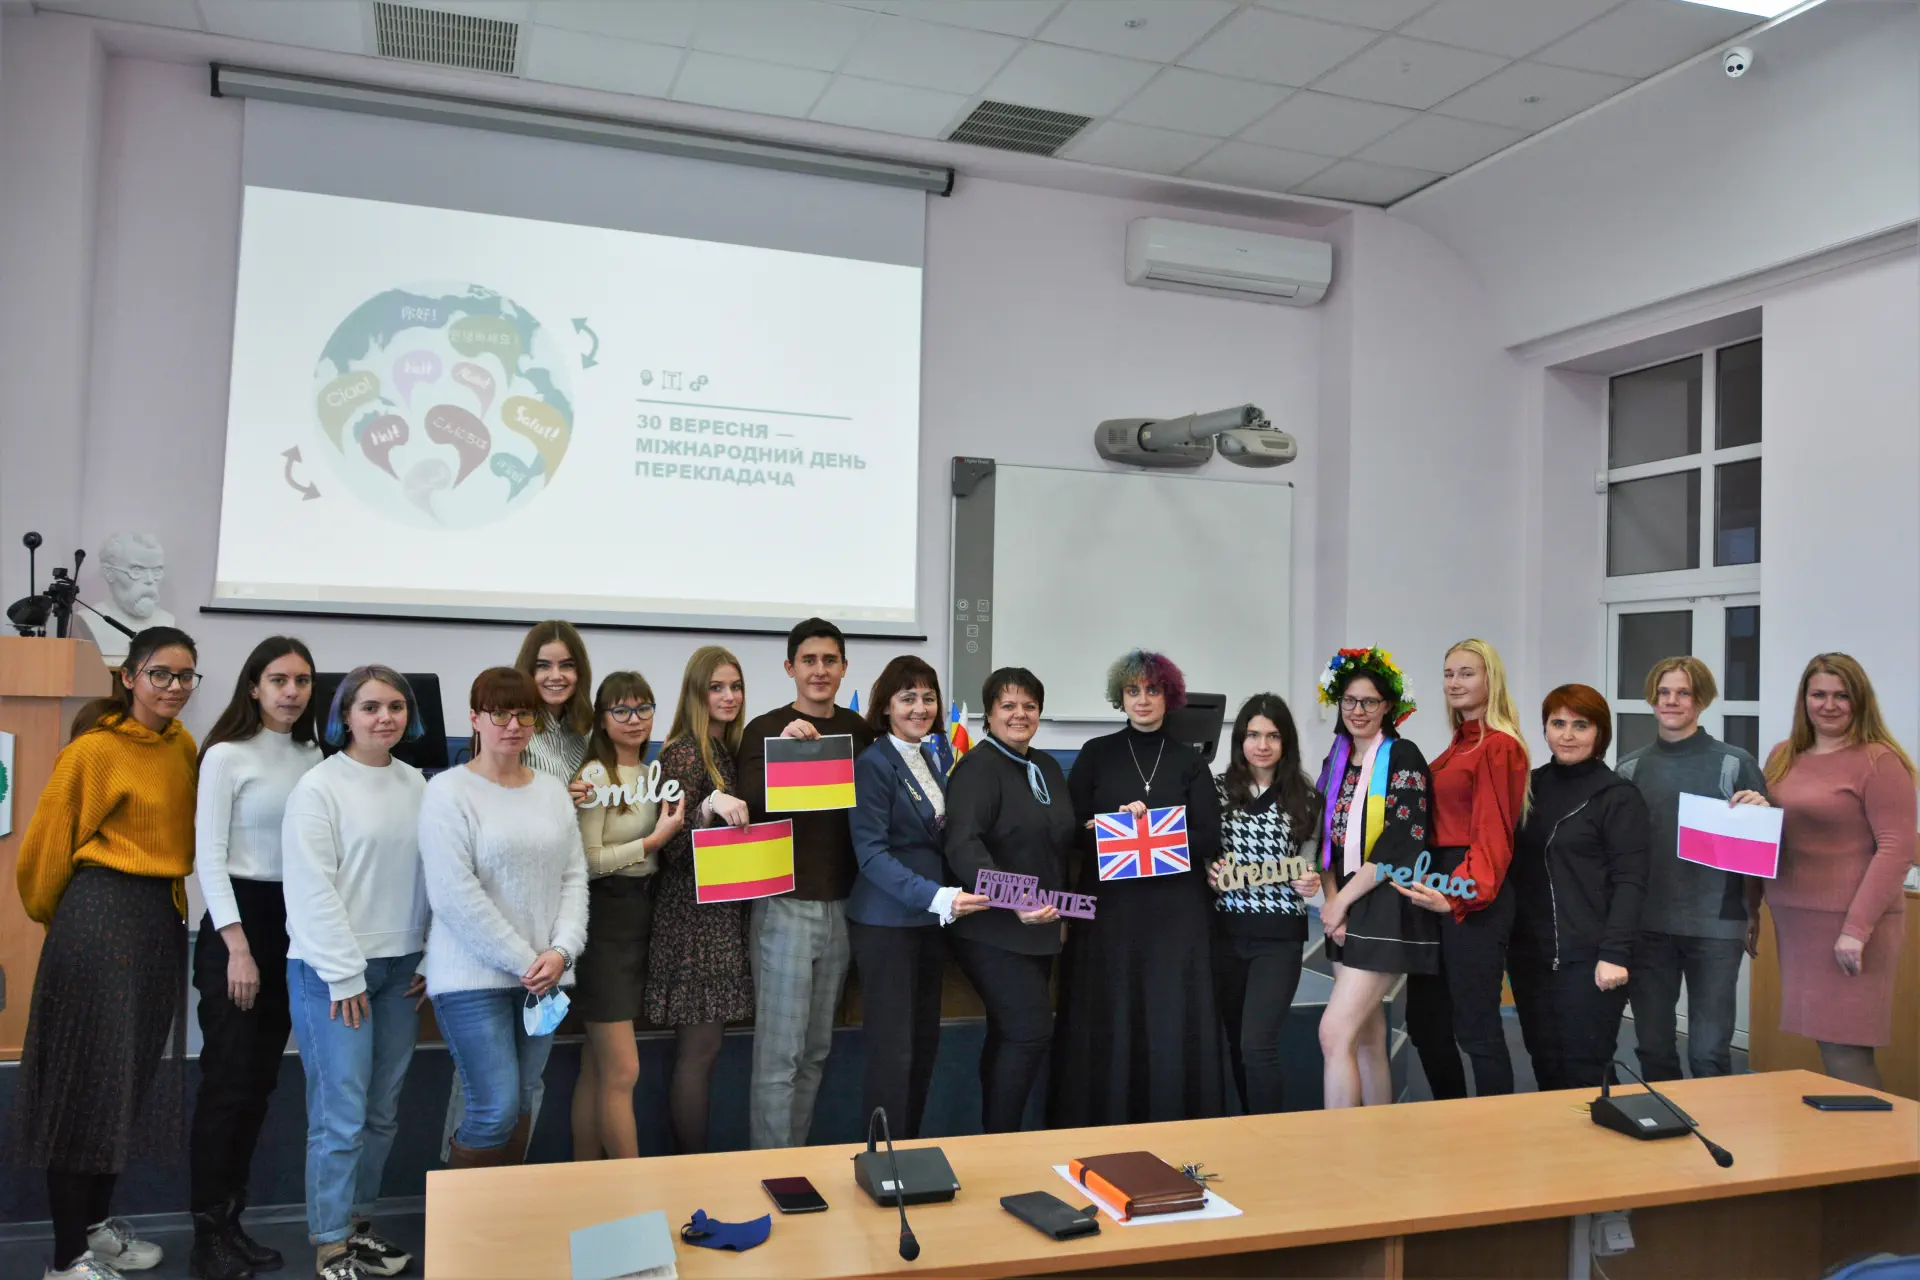 Students-translators and lecturers celebrate their professional holiday